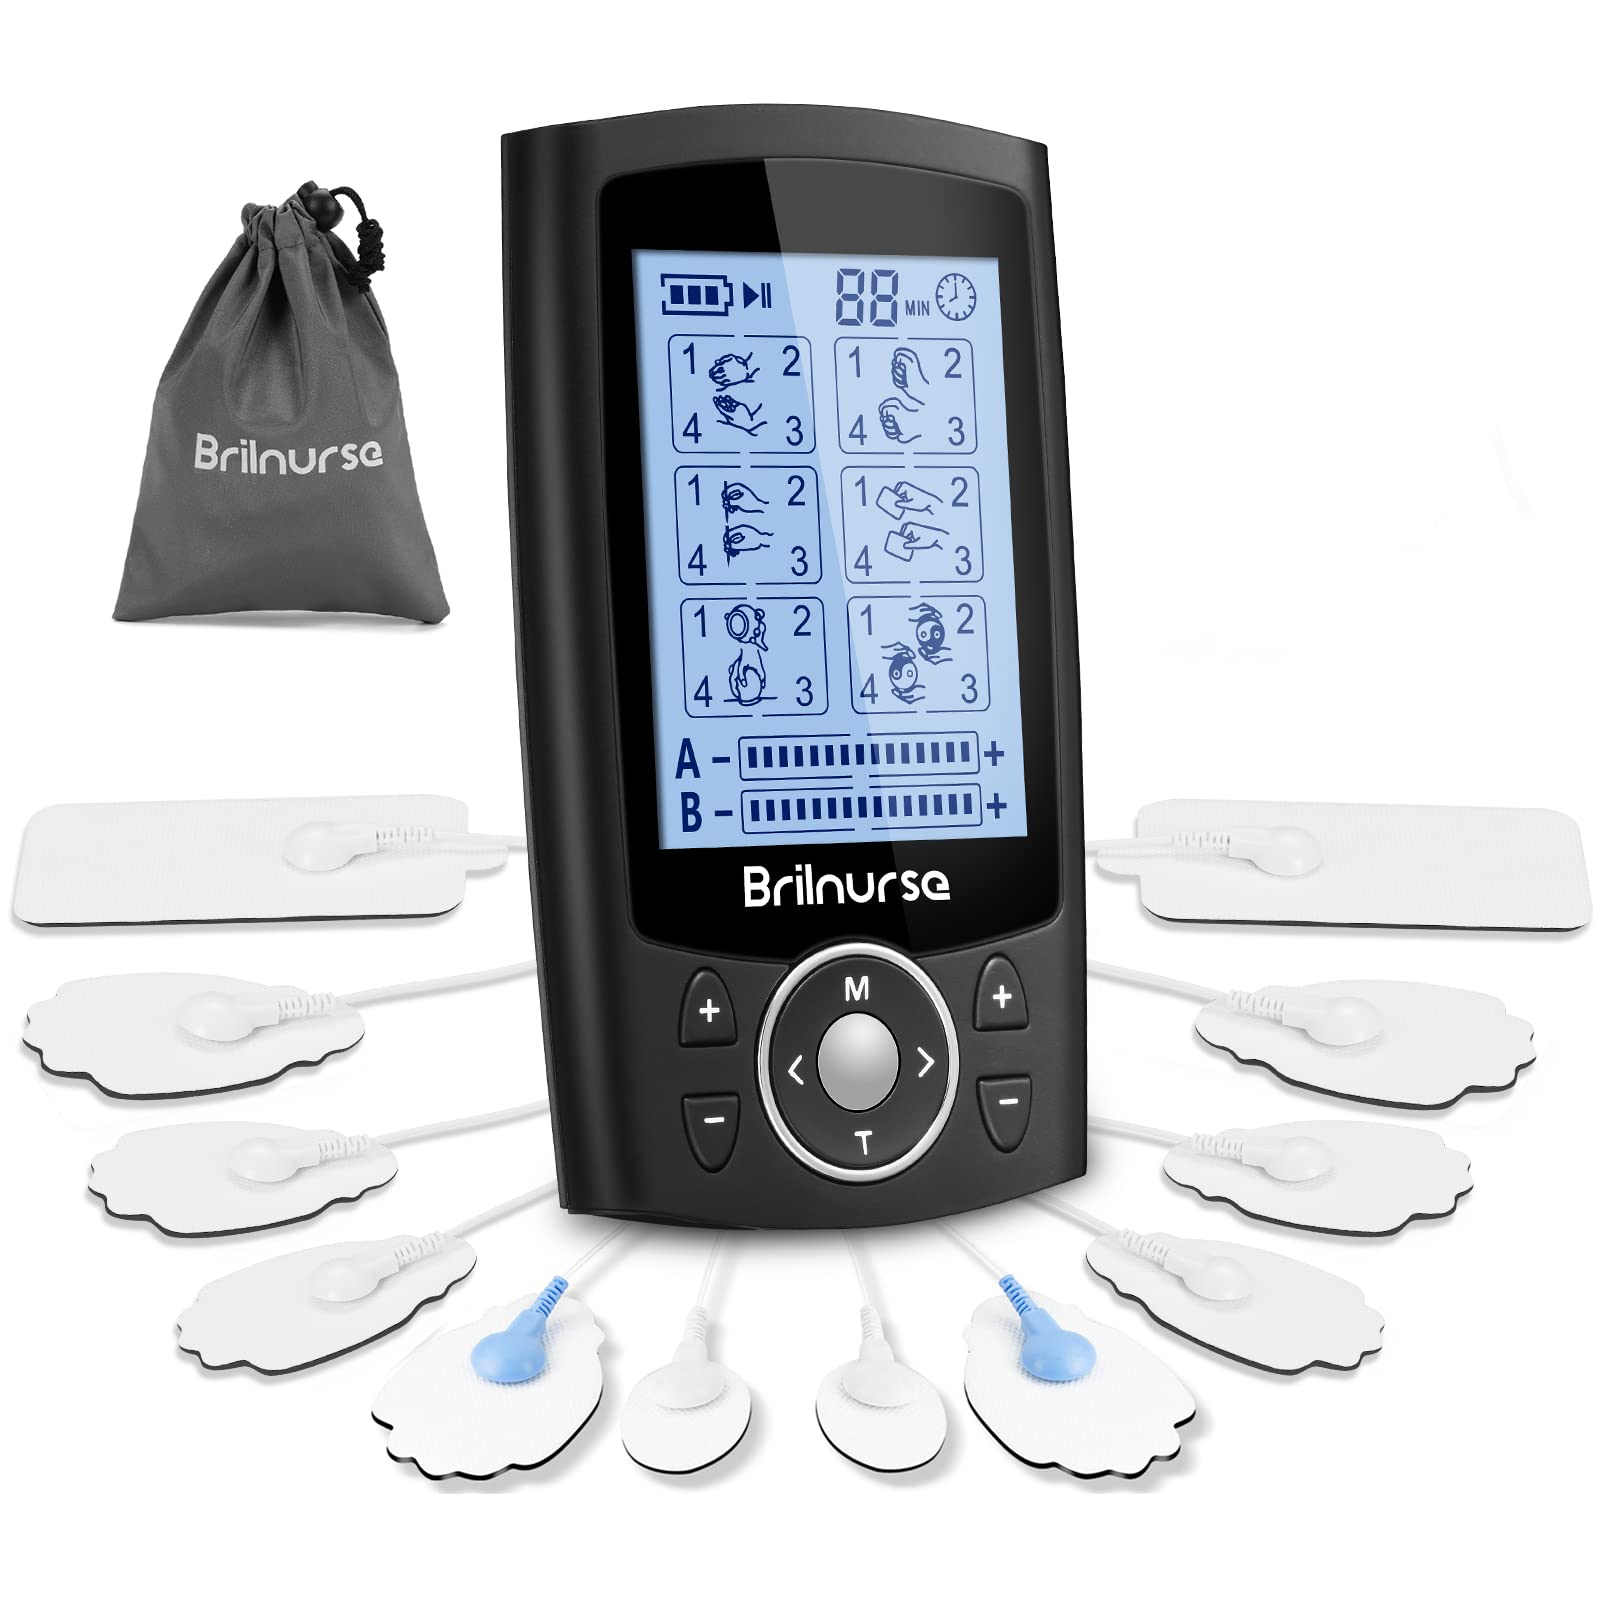 TENS Unit Electronic Massager Snap-On Electrode Pads (20), Small